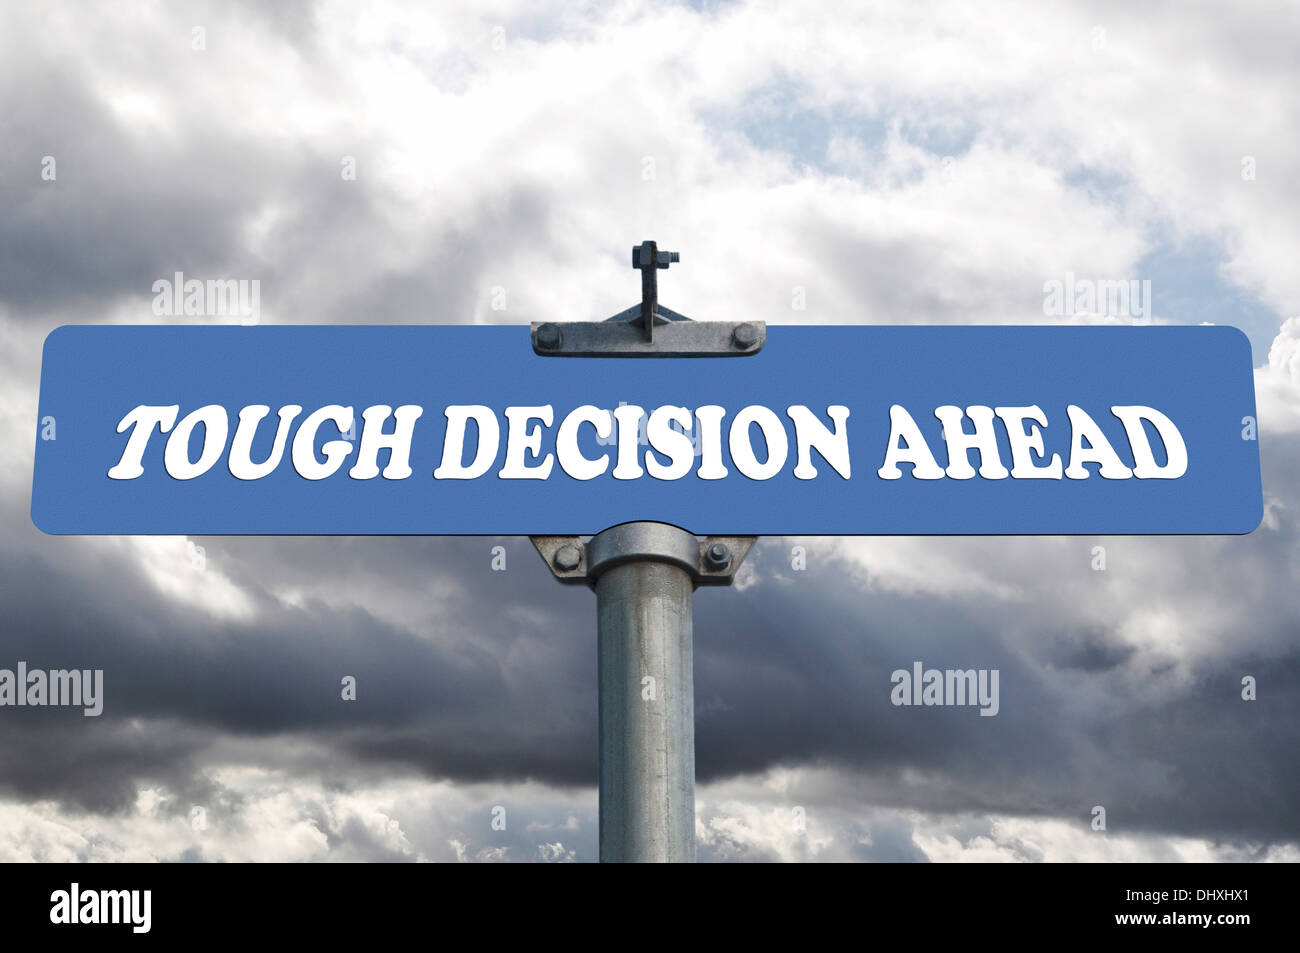 Tough decision ahead road sign Stock Photo